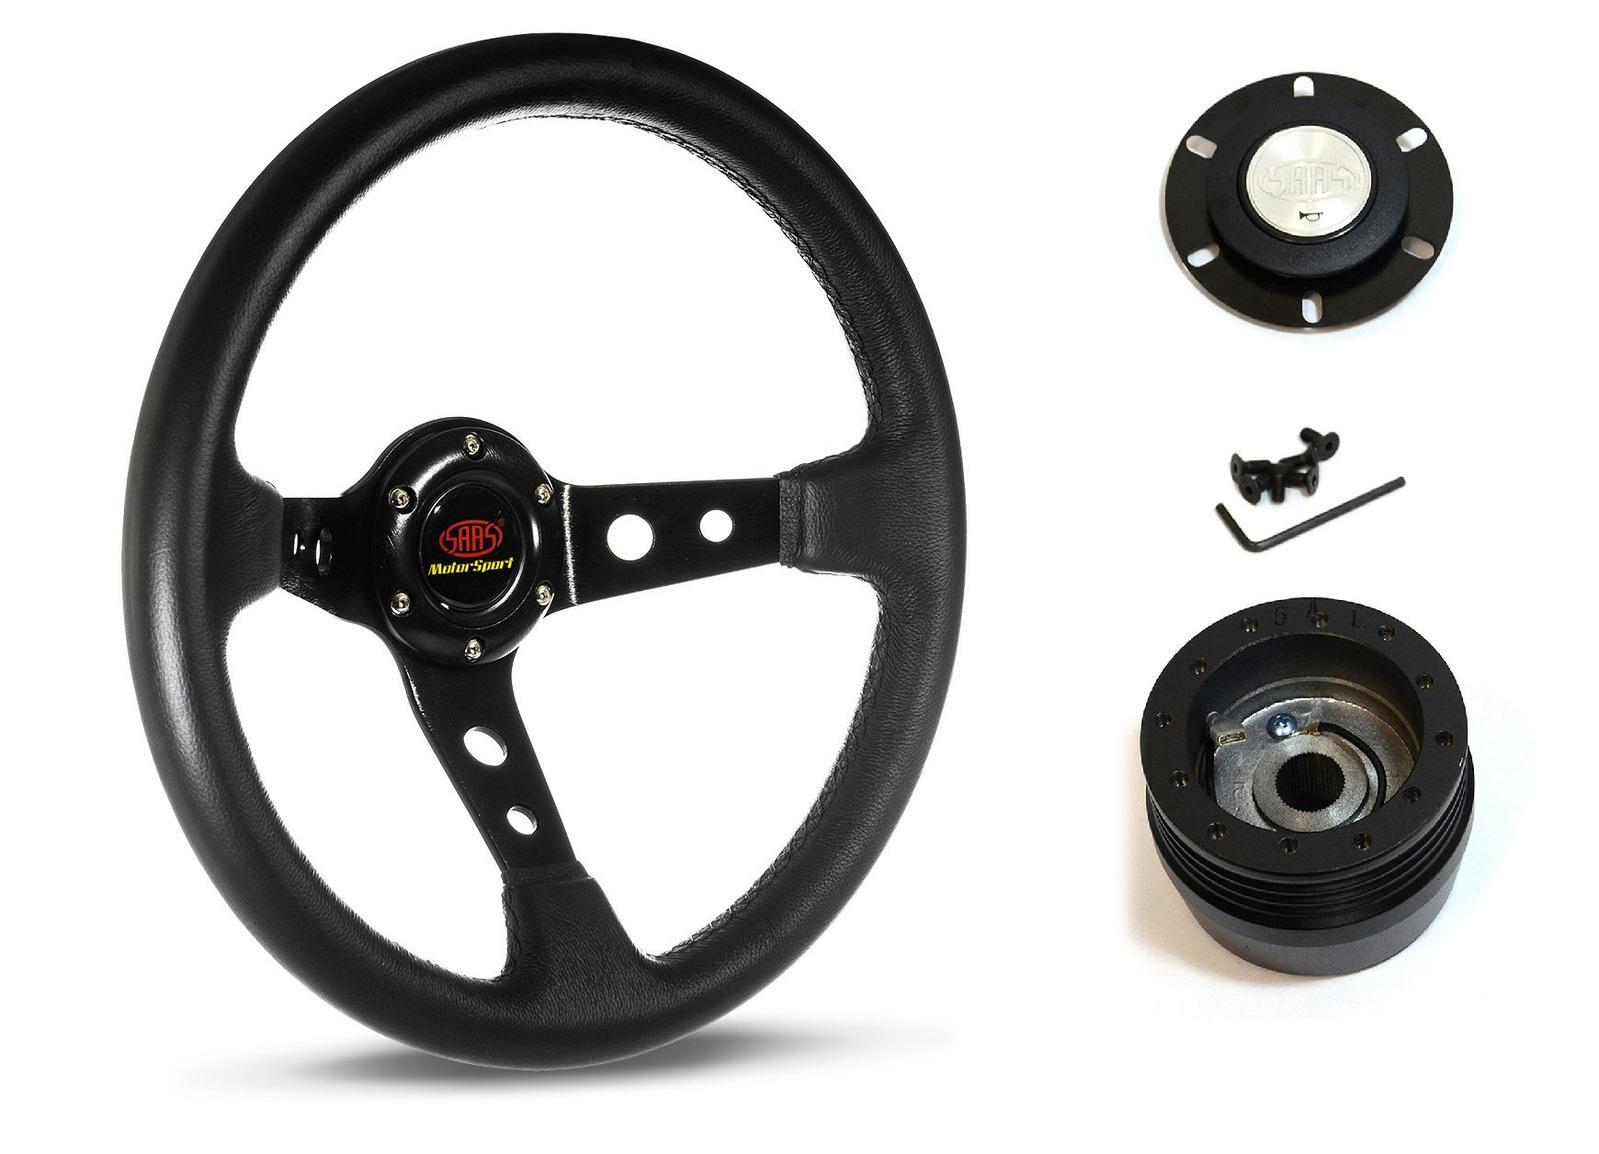 SAAS Steering Wheel Leather 14" ADR GT Deep Dish Black With Holes SWGT3 and SAAS boss kit for Nissan Urvan 1981-1993